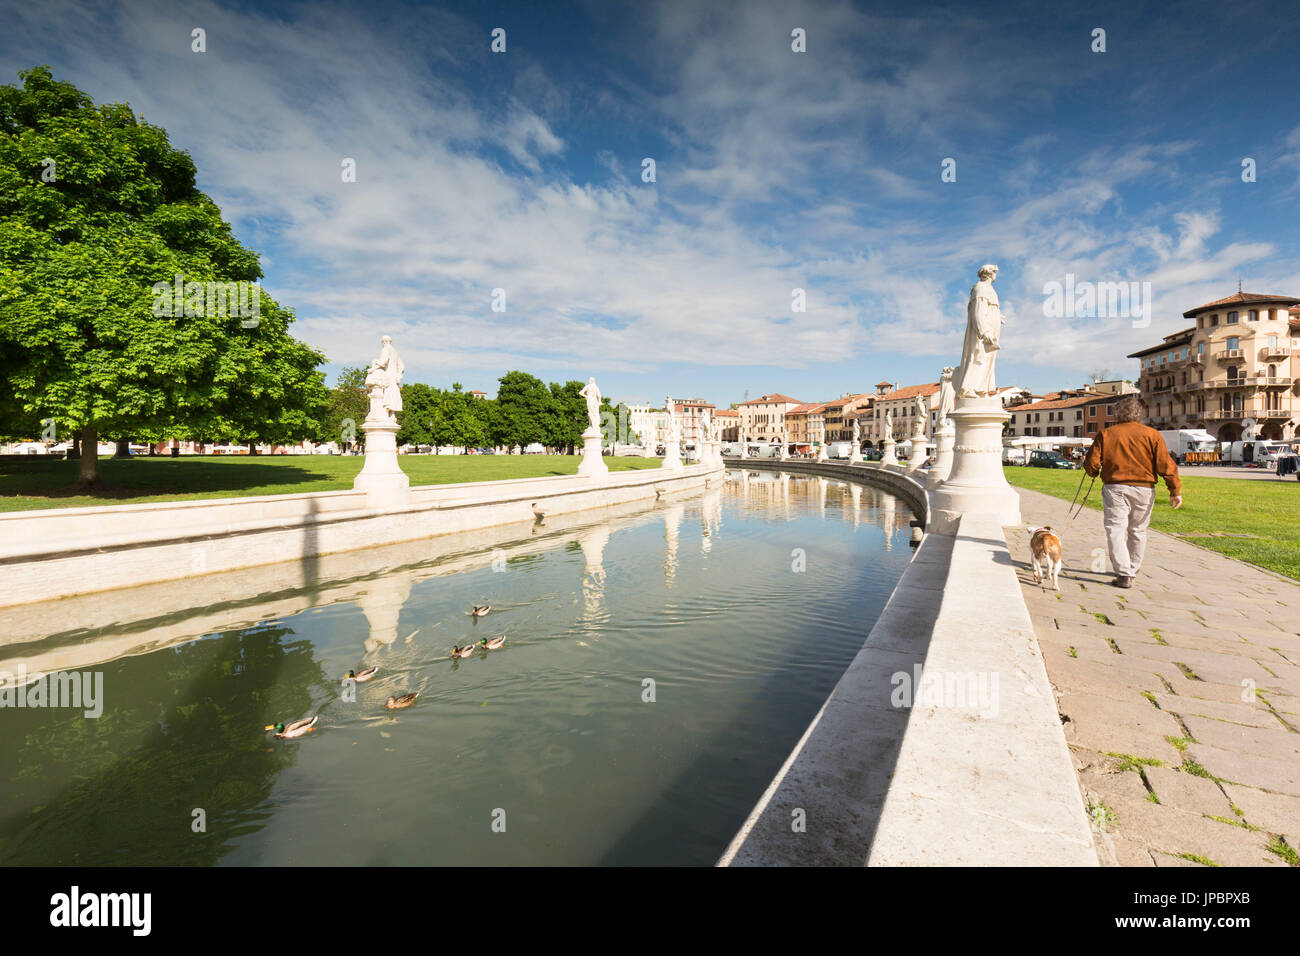 a detail of Prato della Valle, with his typical circular canal and a man with his dog walking around it, padua province, veneto, italy, europe, Stock Photo